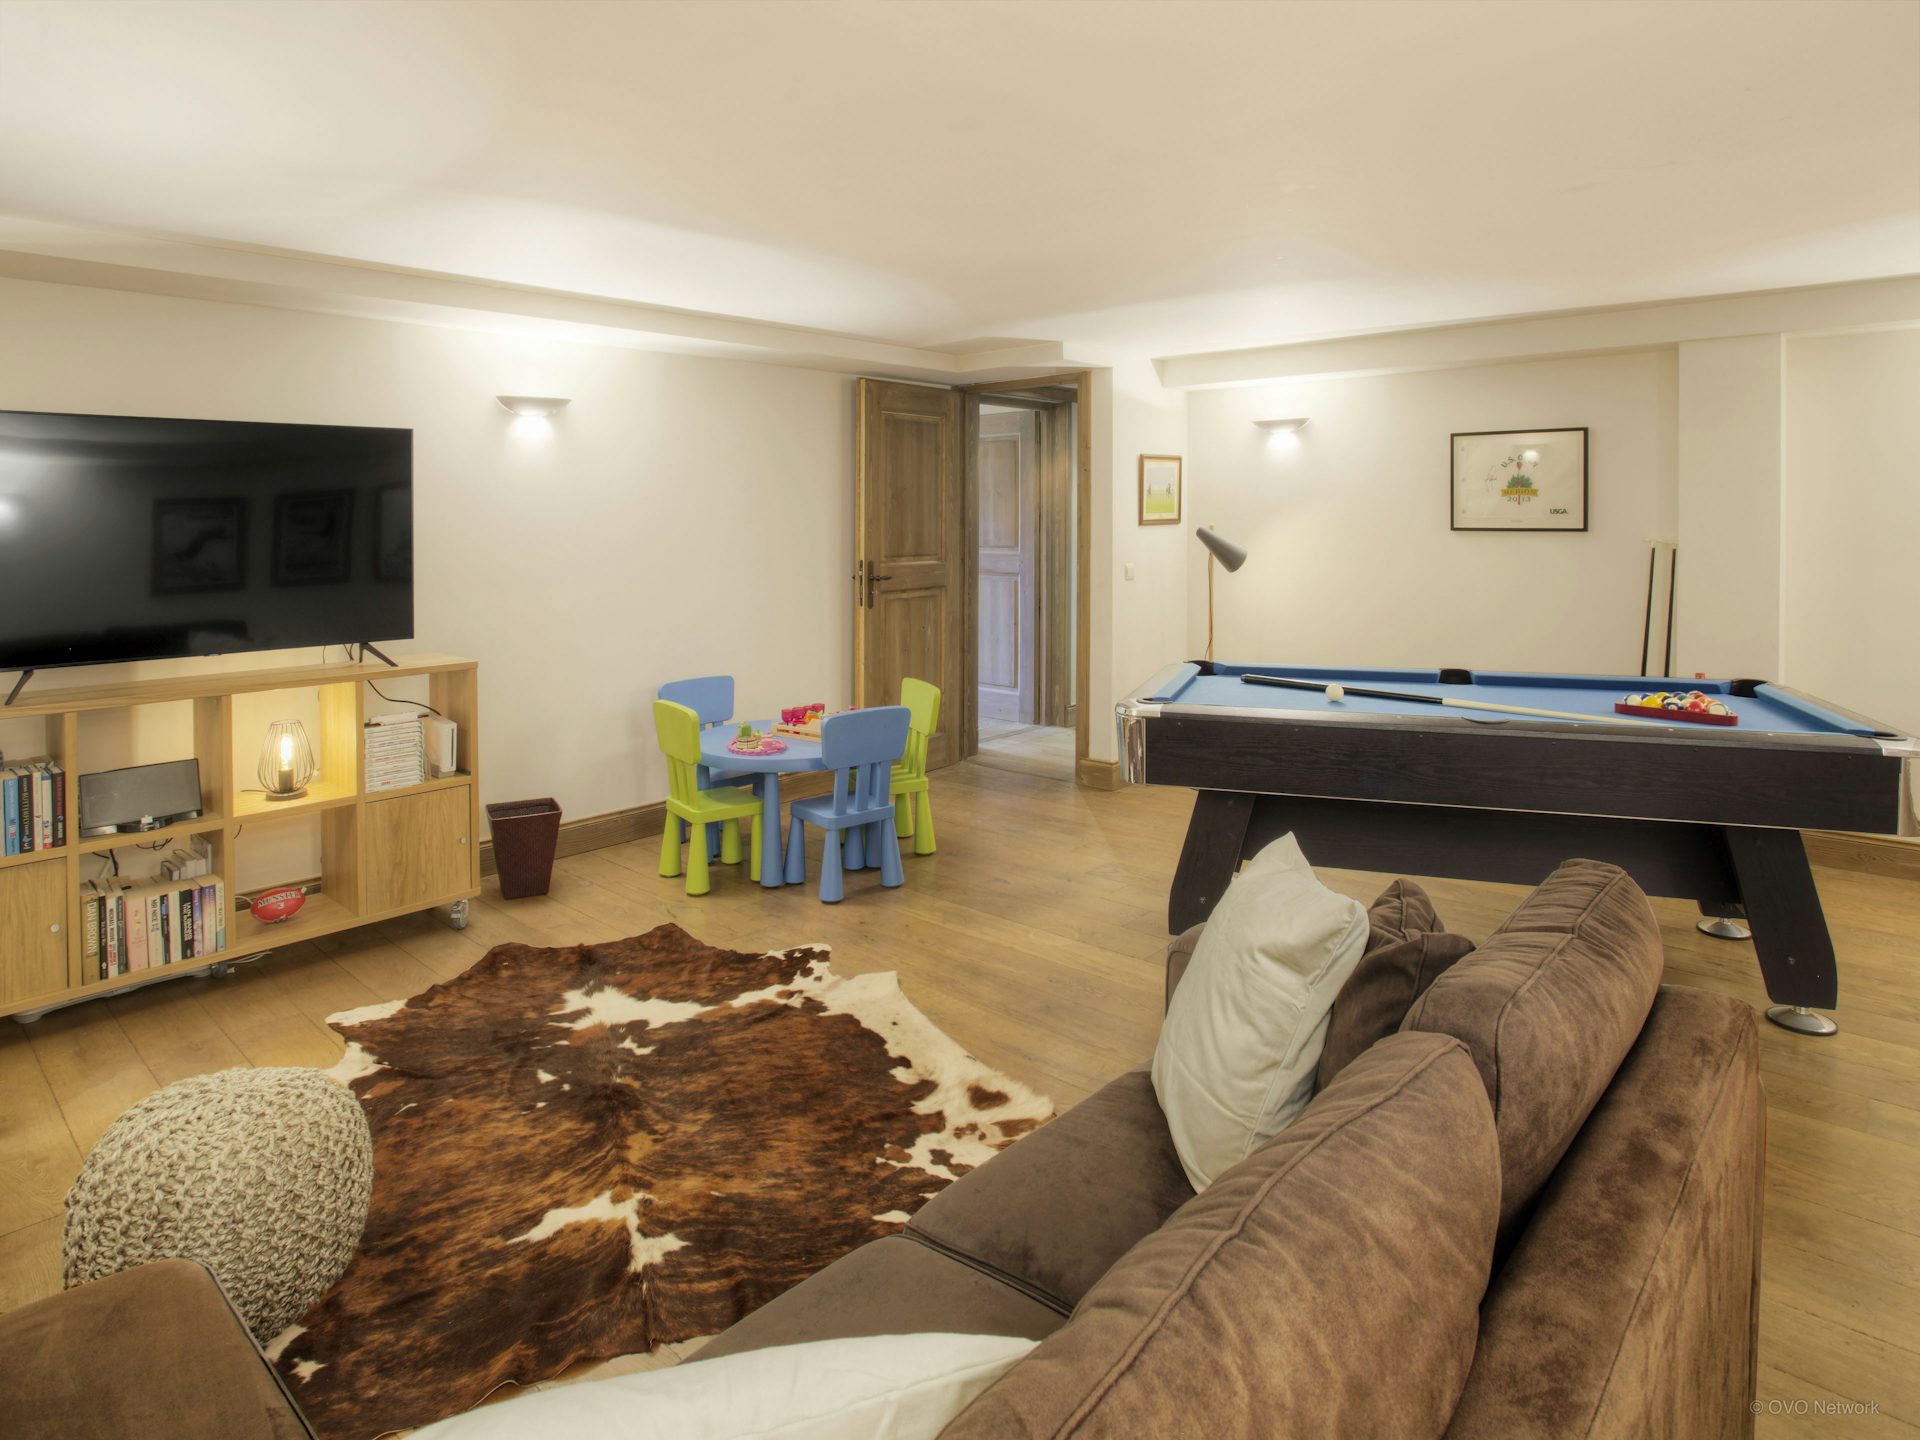 chalet-petille-kids-adults-living-games-space-with-pool-table-soft-rug-sofa-tv-kids-table